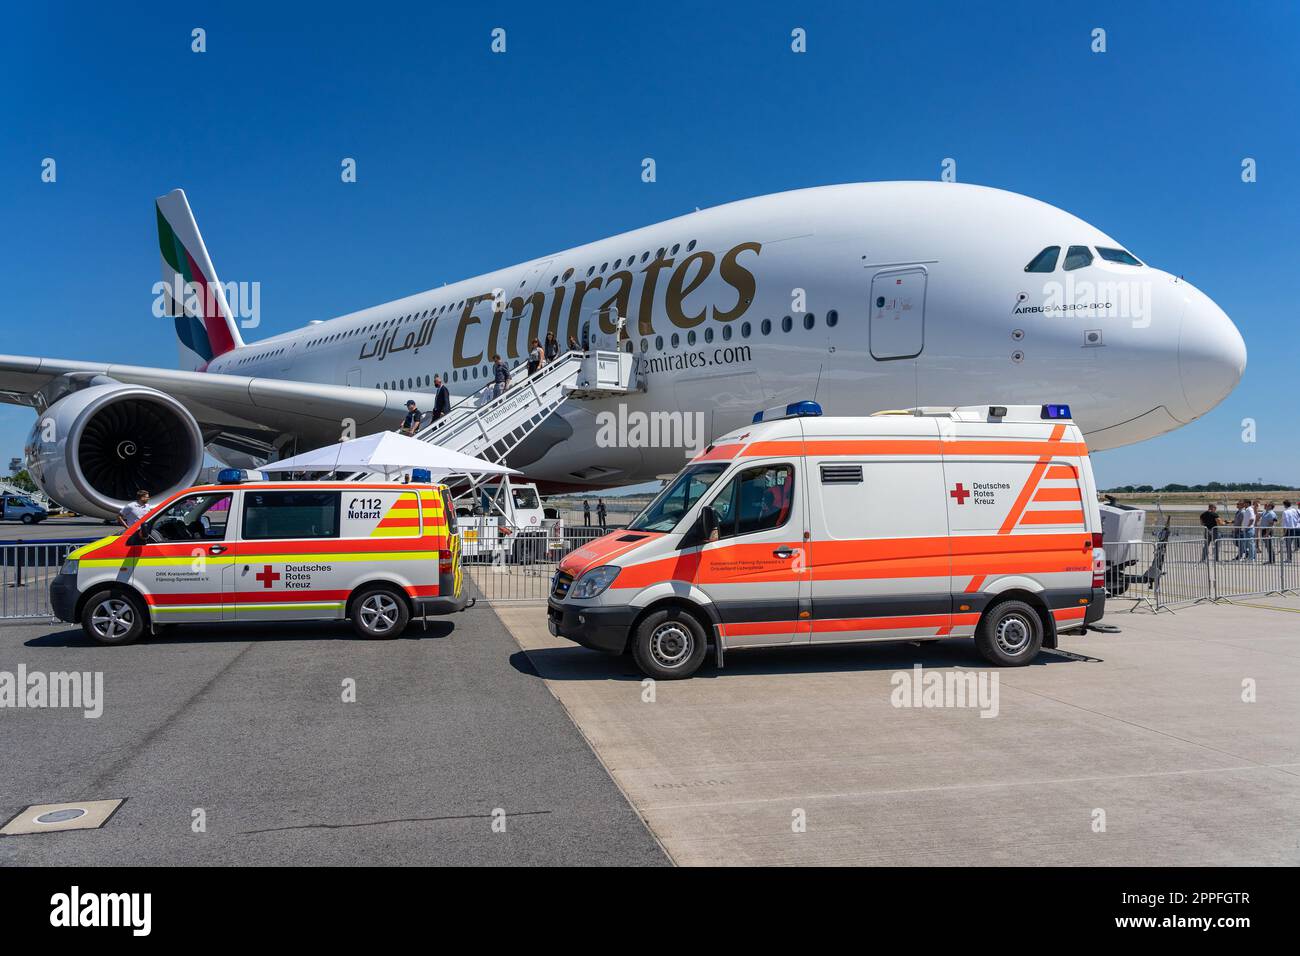 BERLIN, GERMANY - JUNE 23, 2022: Two ambulances in front of the largest passenger airliner in the world - Airbus A380-800. Emirates Airline. Exhibition ILA Berlin Air Show 2022 Stock Photo